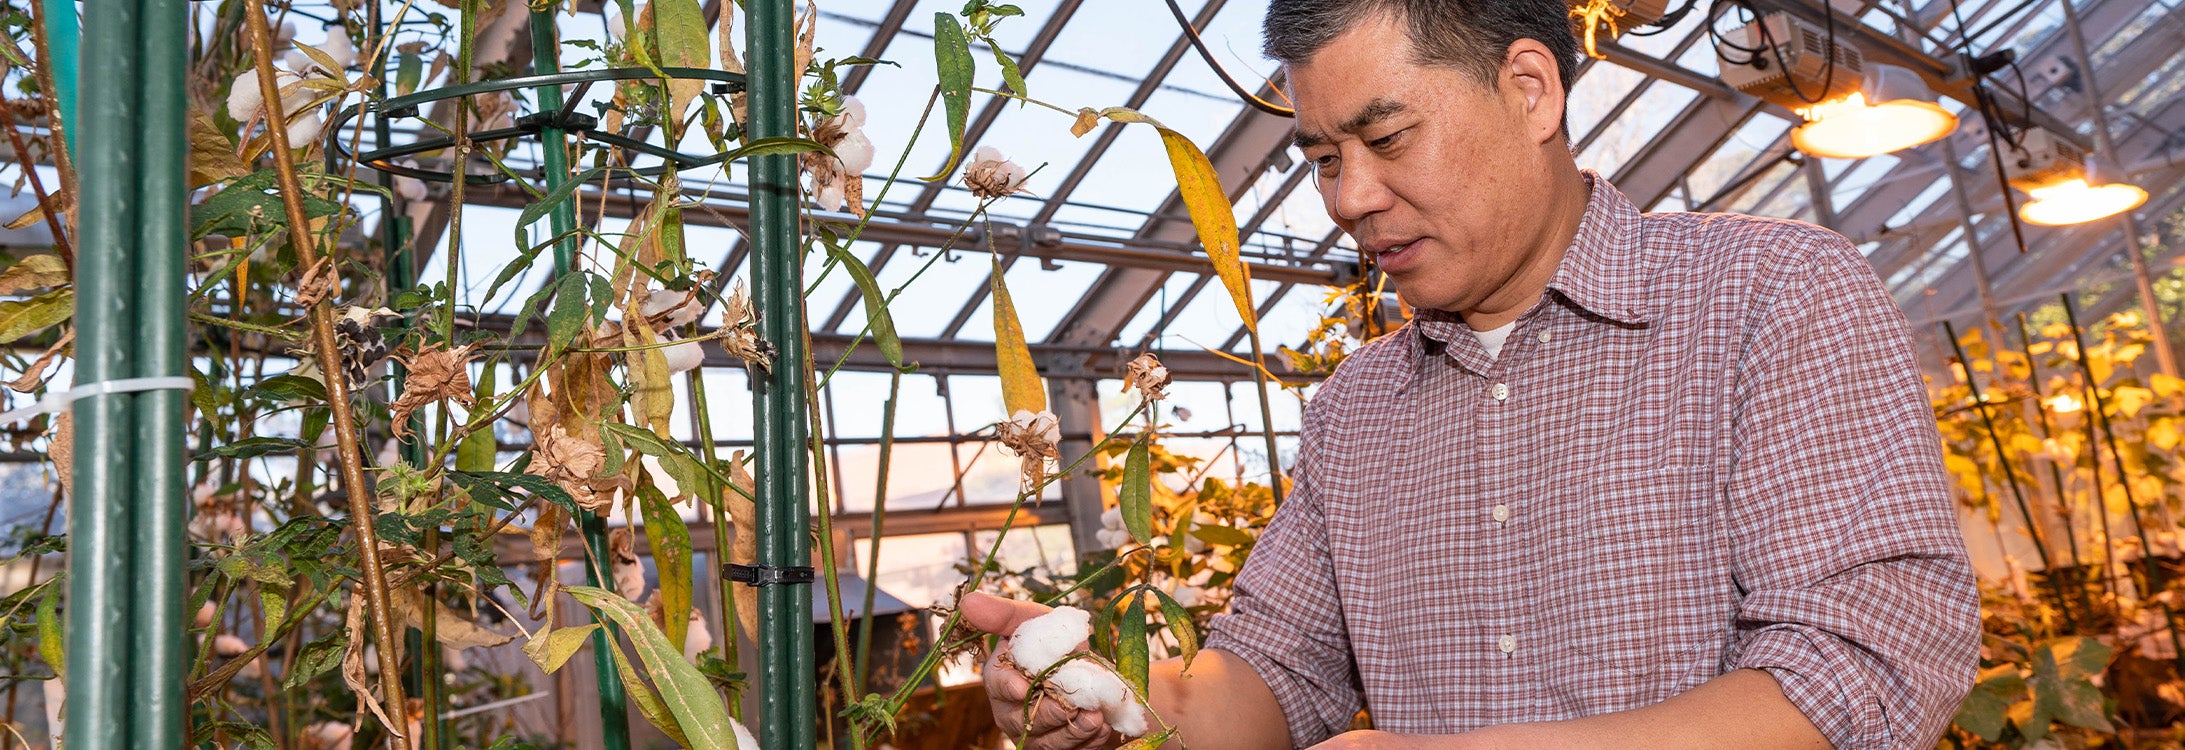 ECU researcher growing cotton in greenhouse